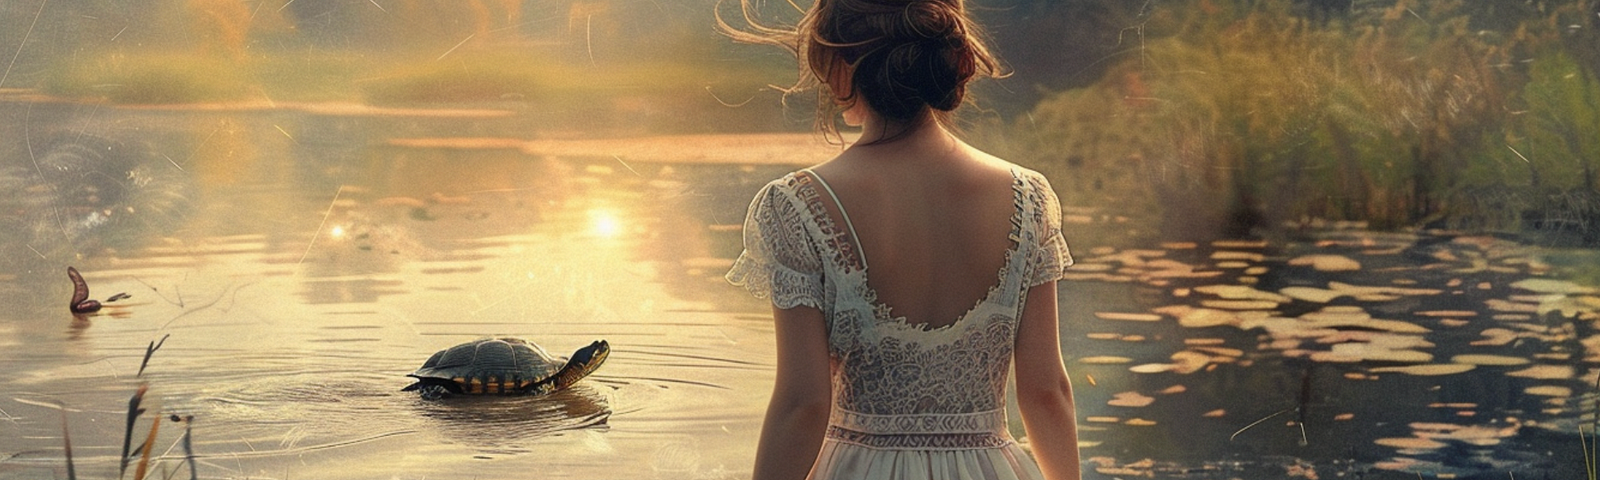 A young lady in a white vintage dress walks alongside a lake and encounters a turtle nearby.